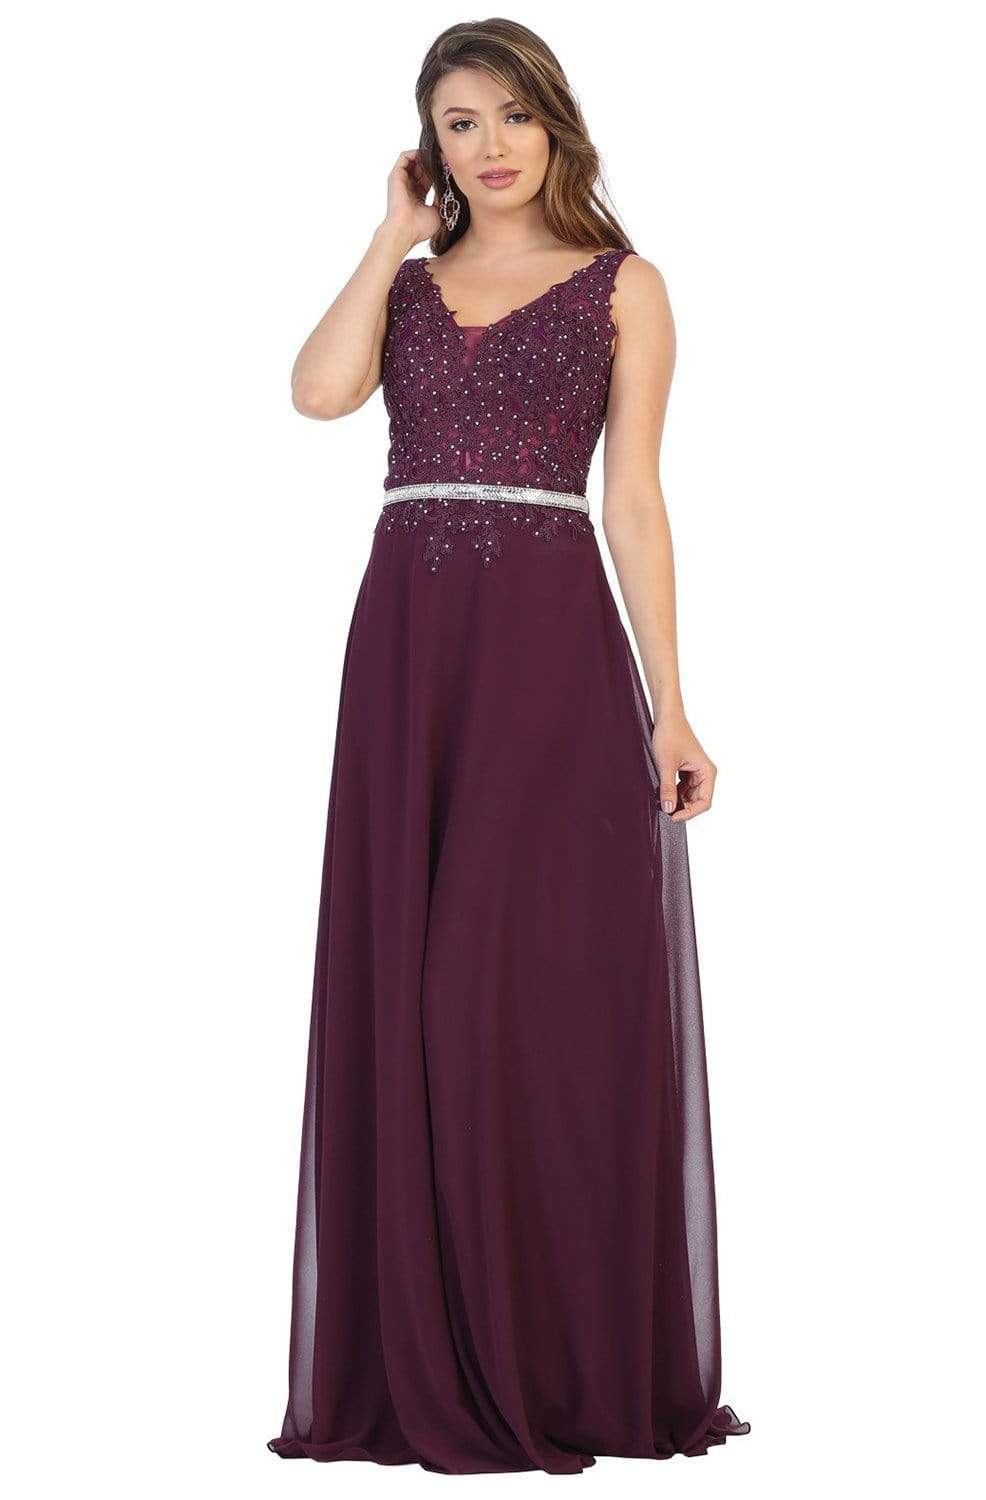 May Queen - MQ1701 Embroidered Plunging V-neck A-line Gown Evening Dresses 4 / Burgundy